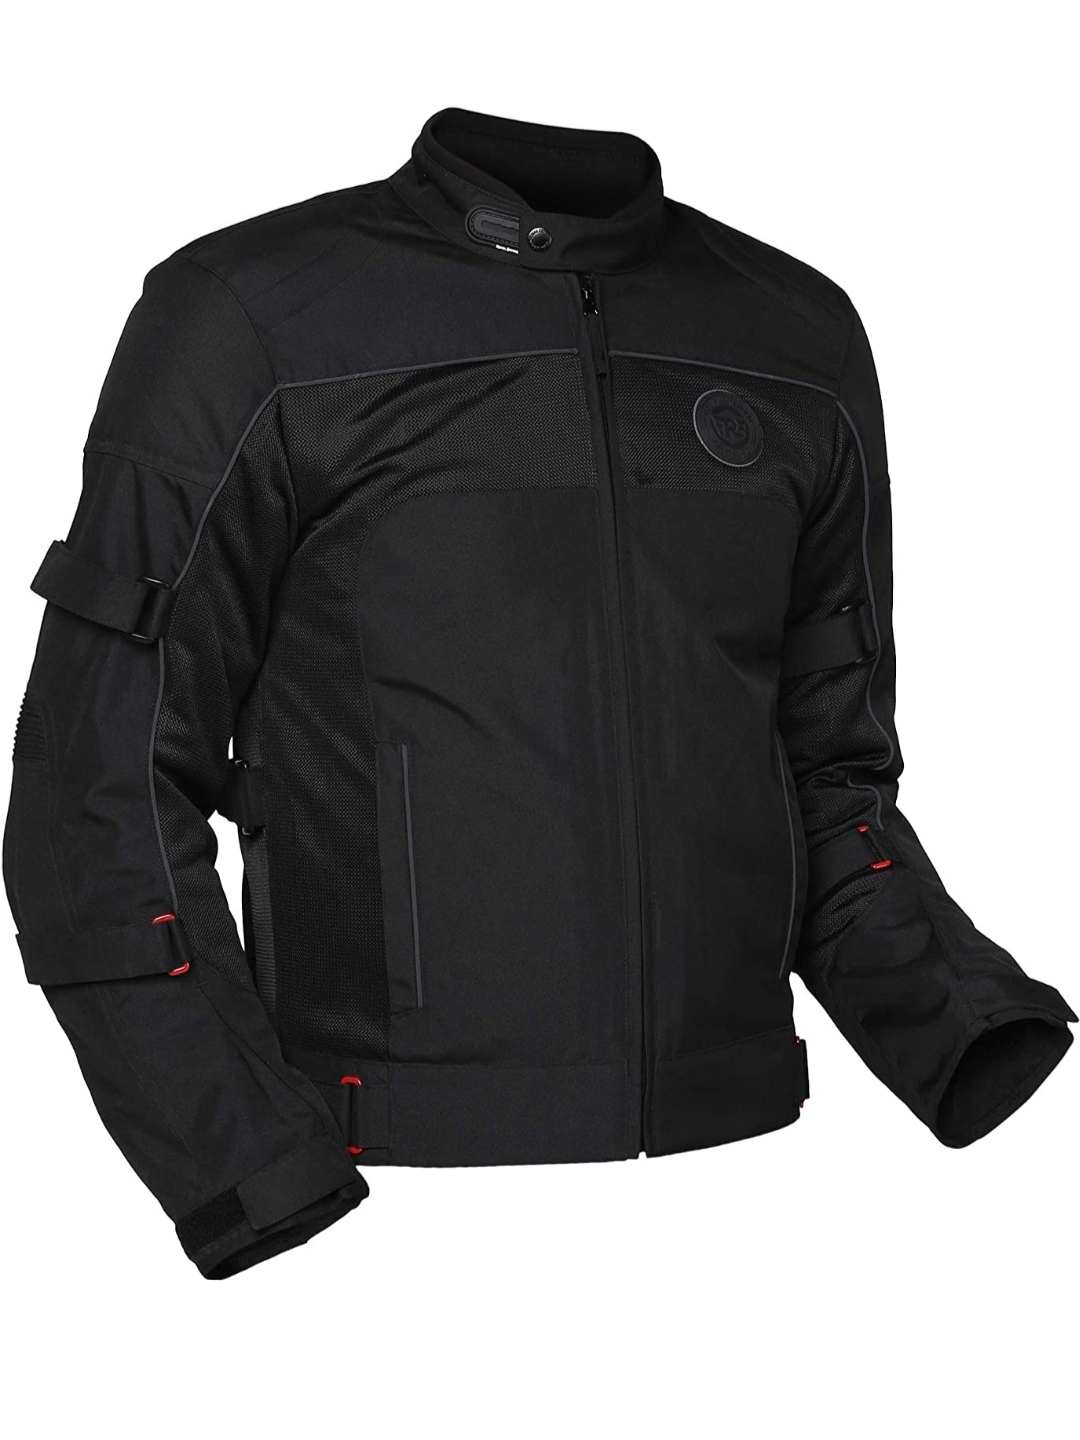 Moto Torque - RESISTOR jacket transcends all rider types, blending casual  styling with complete protection. The CE level 2 certified armour in the  shoulder, elbow and back. Find Dealers :  www.mototorque.in/riding-gear-dealers PC - @